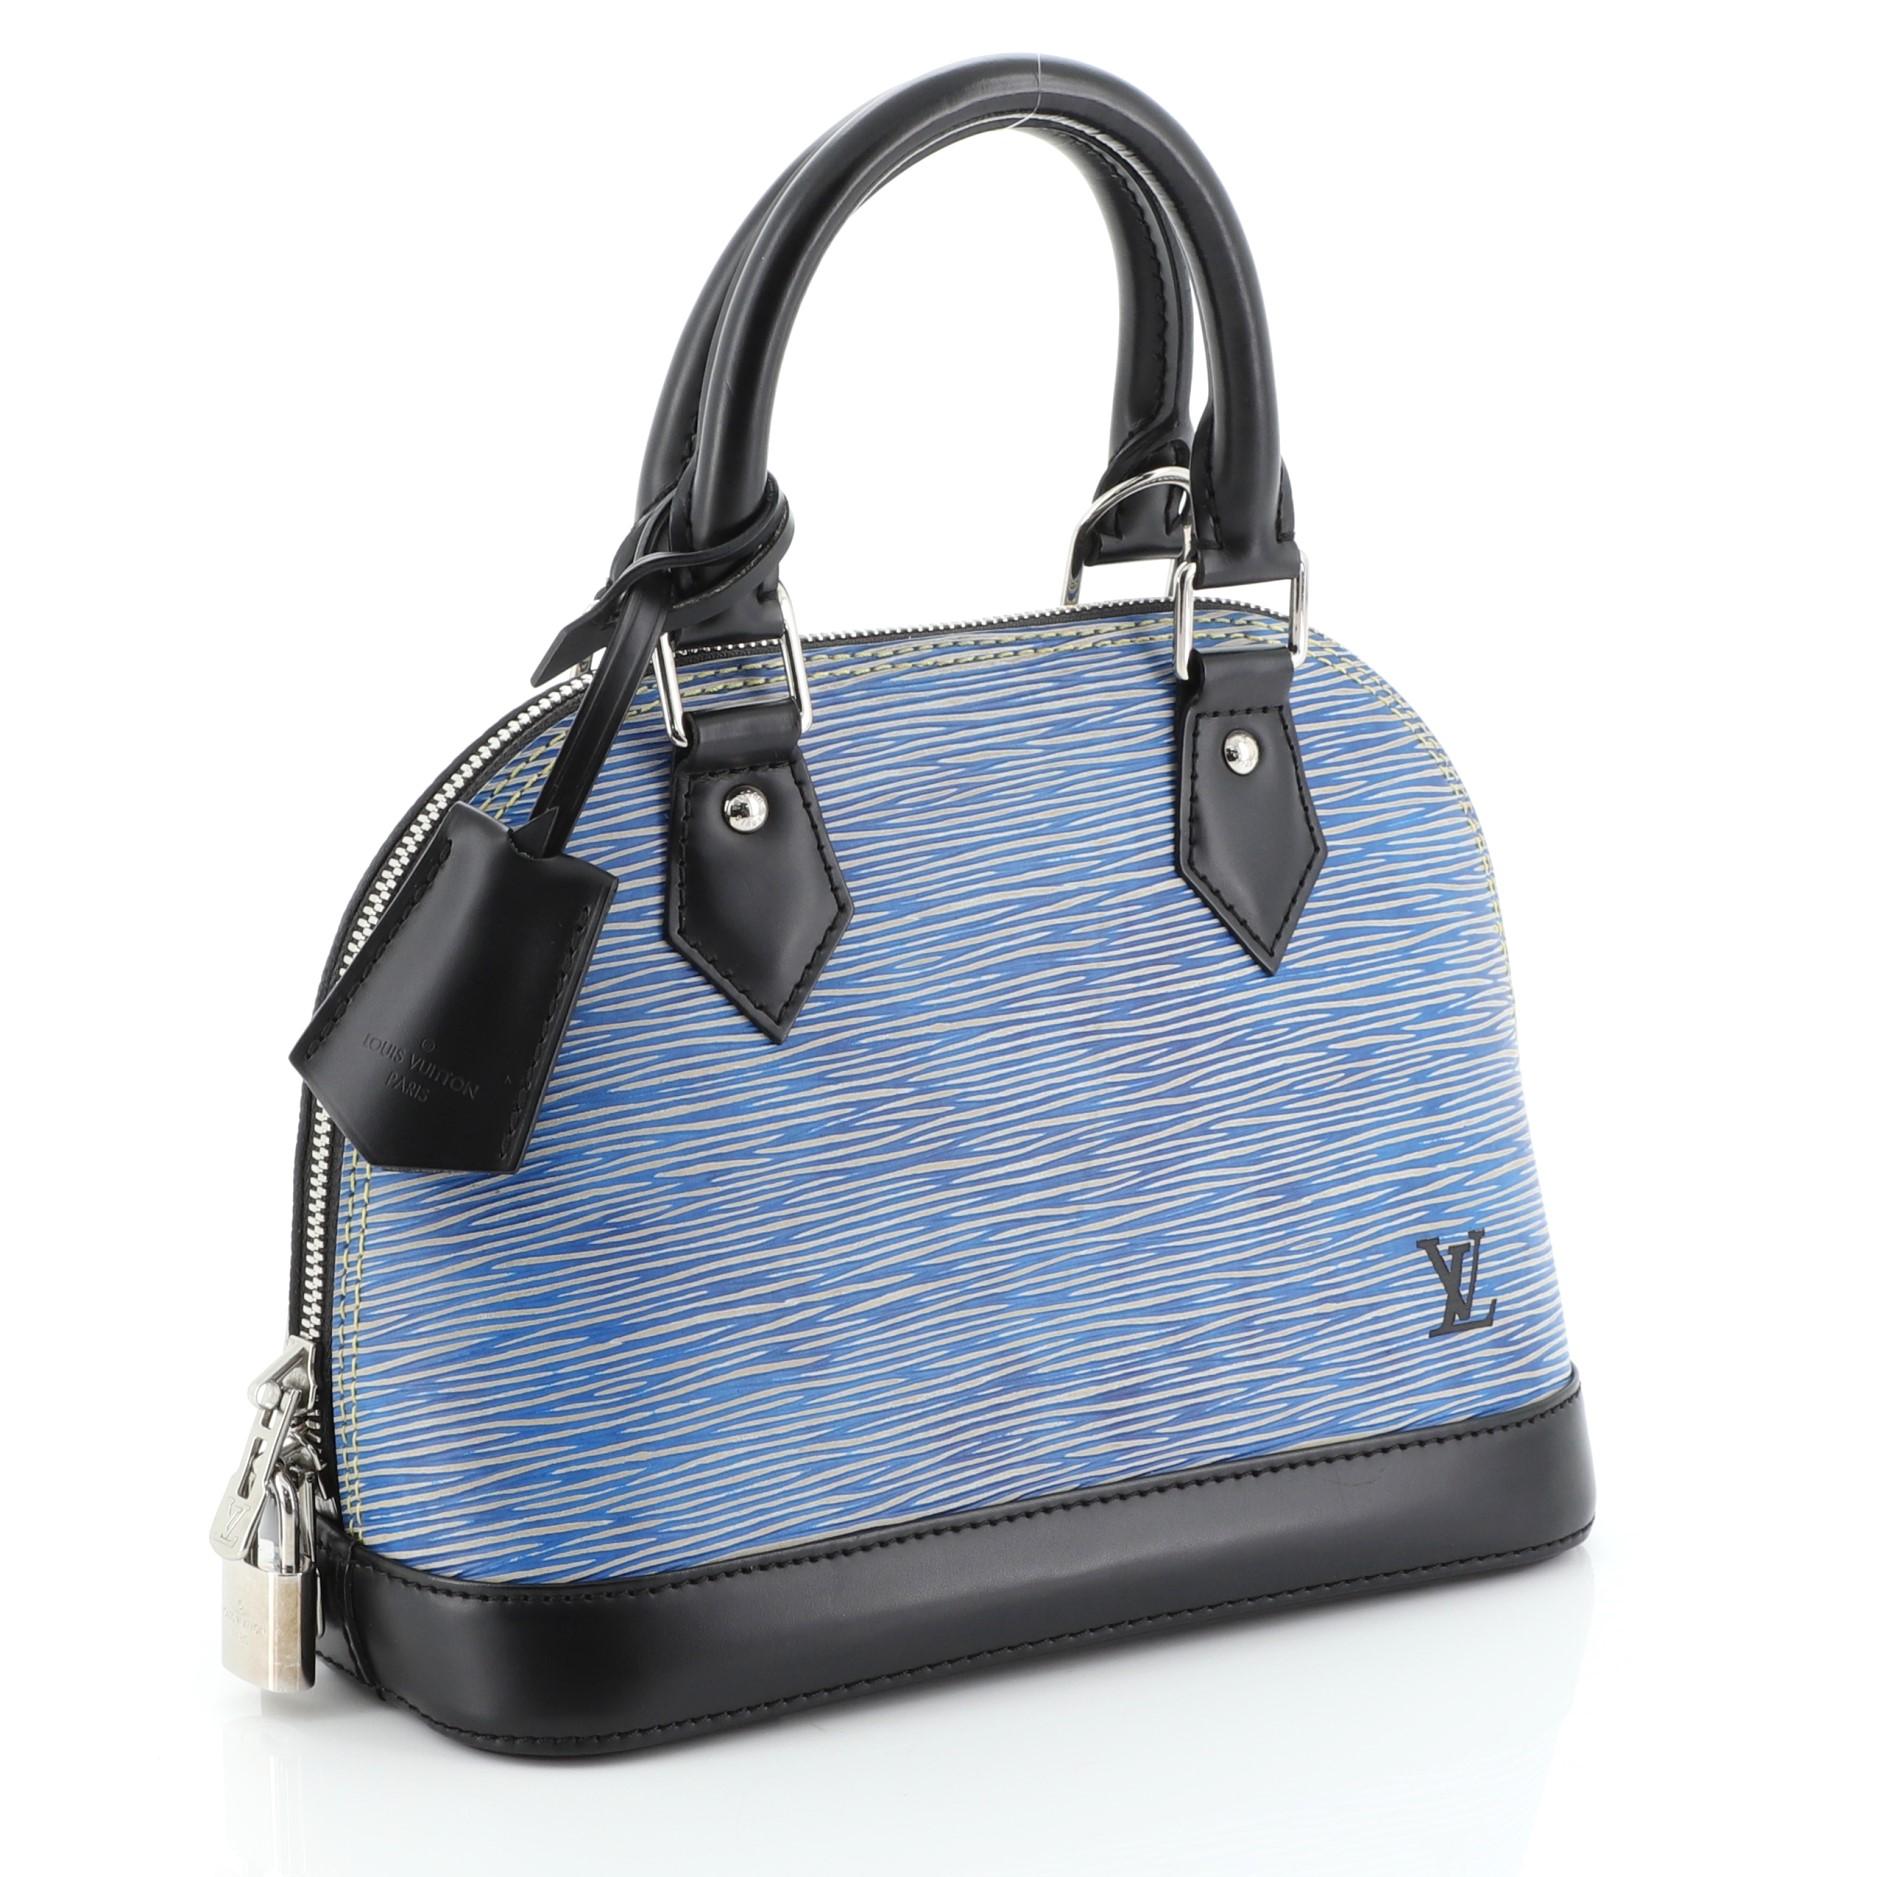 This Louis Vuitton Alma Handbag Epi Leather BB is a classic piece named after Alma Bridge, a span that connects two Parisian neighborhoods. Crafted in blue epi leather, features dual rolled leather handles and silver-tone hardware. Its all-around